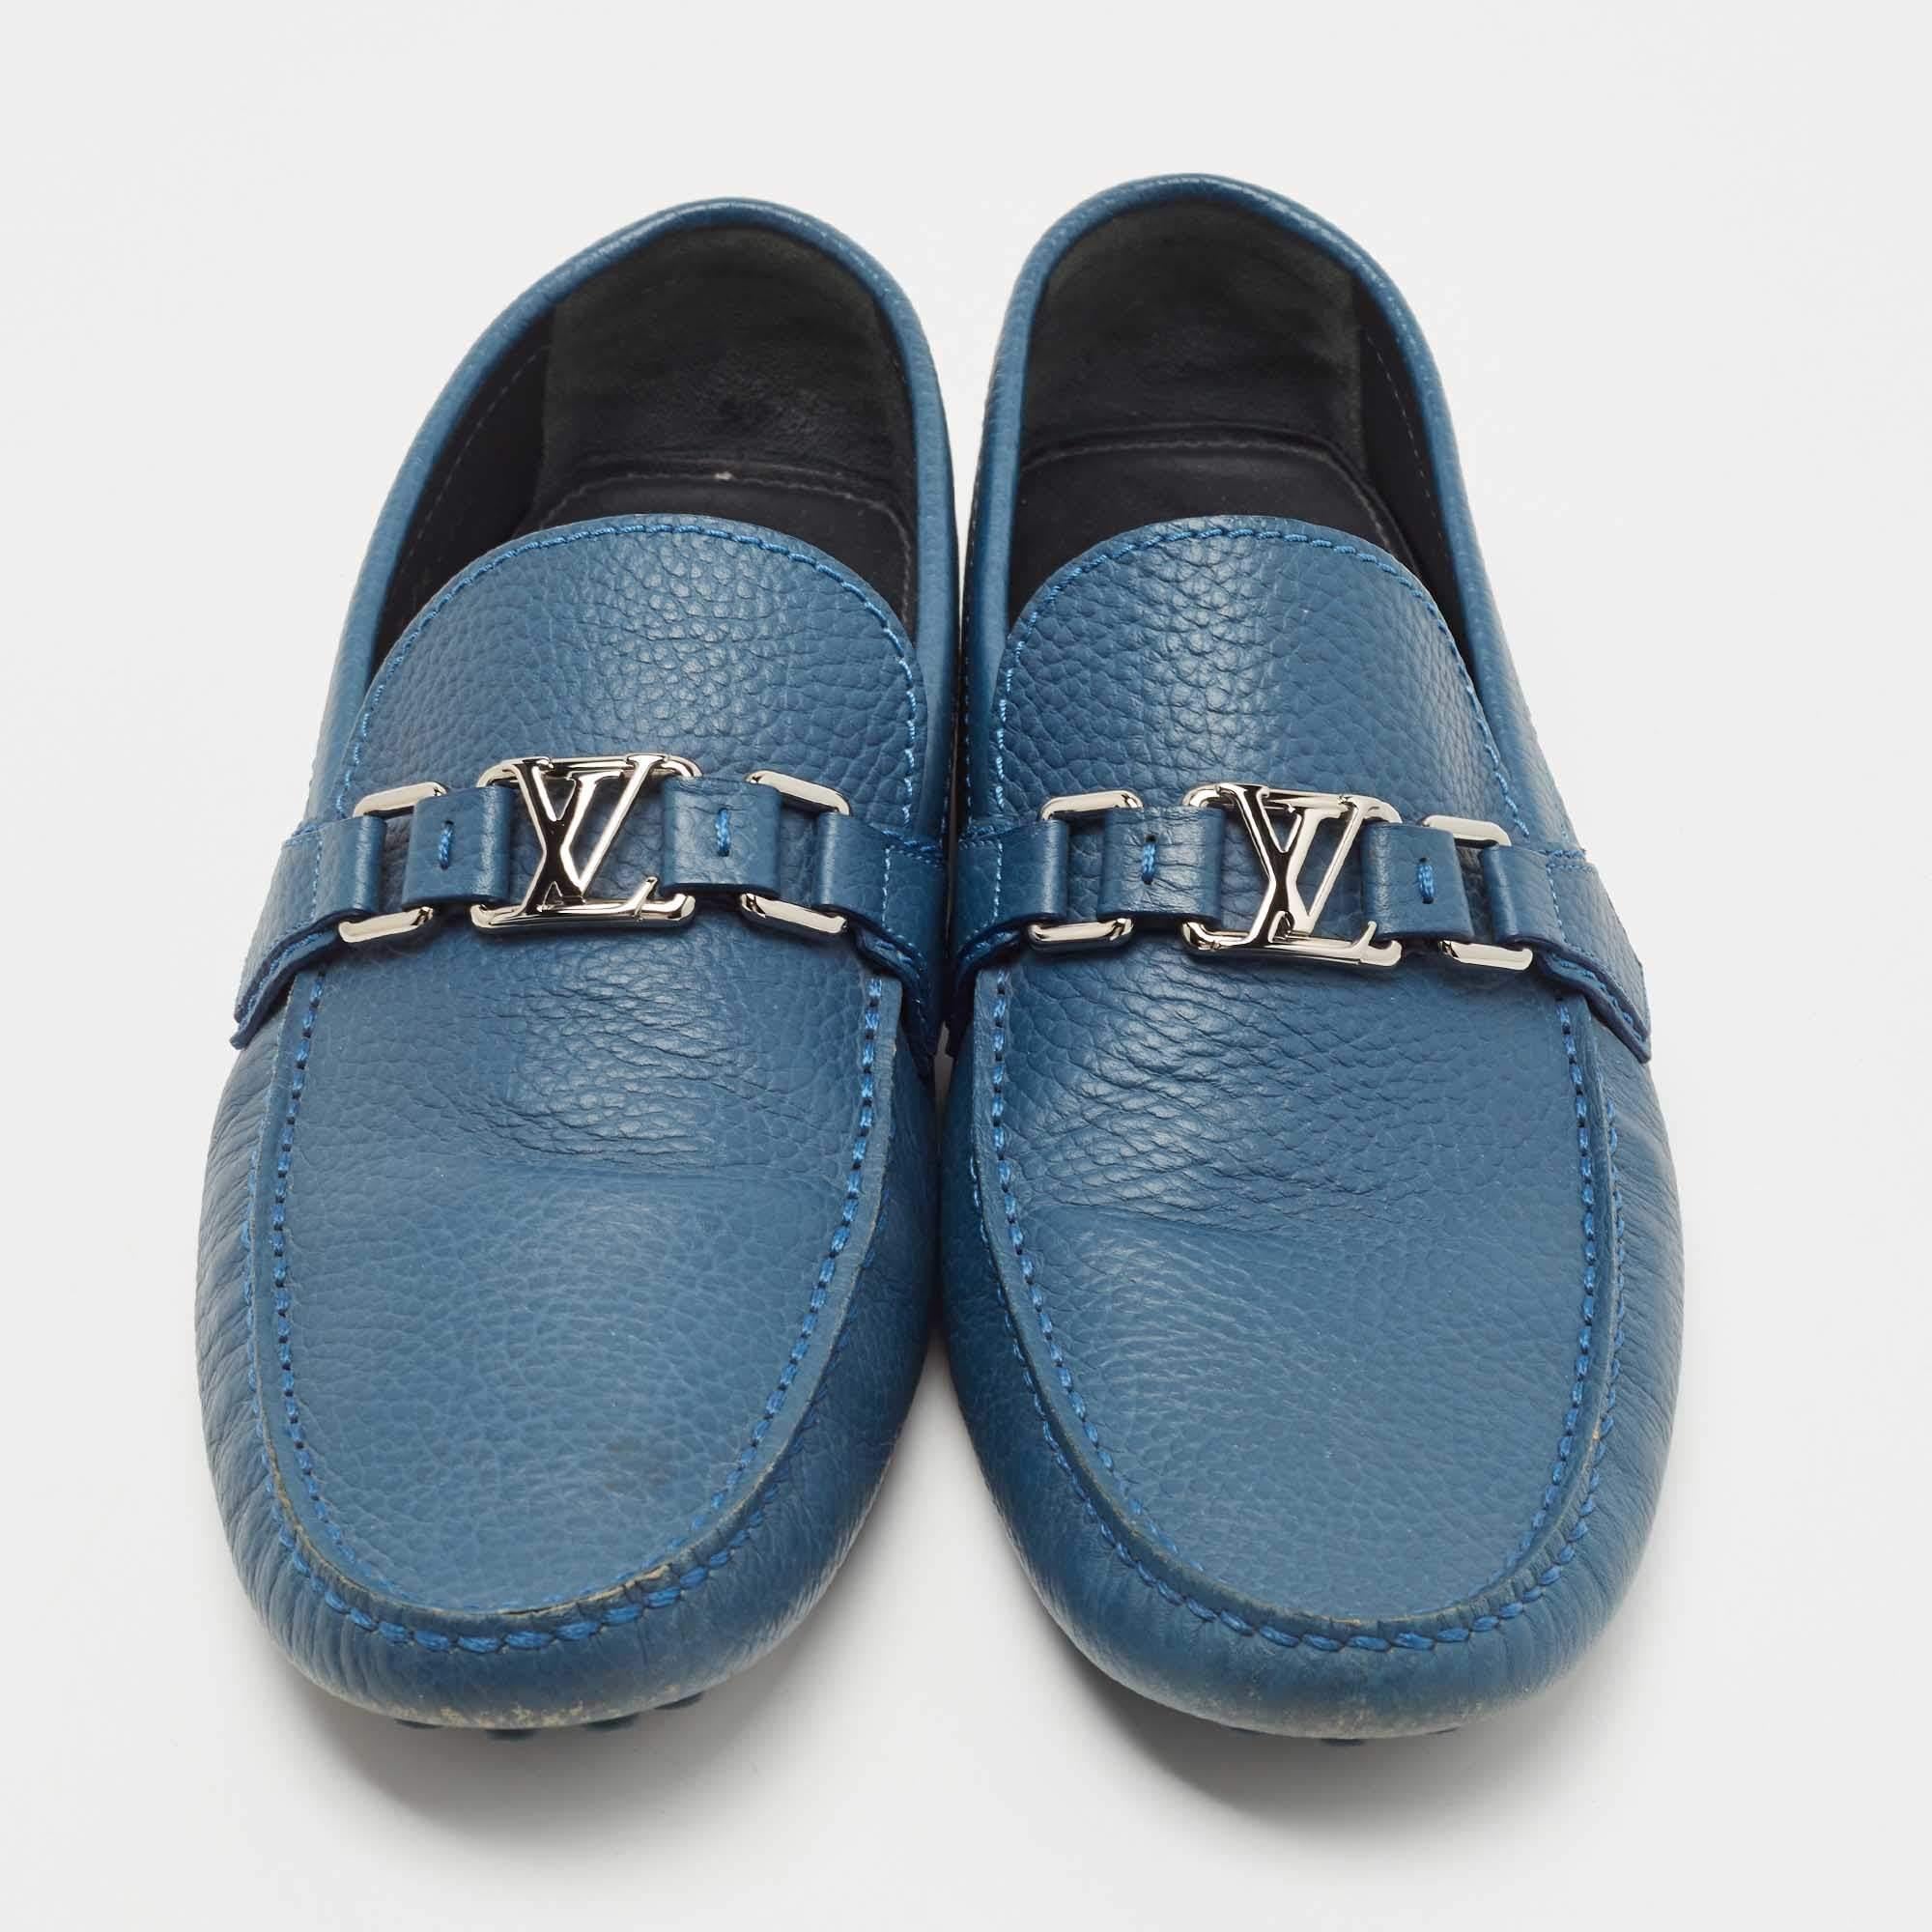 Practical, fashionable, and durable—these designer loafers are carefully built to be fine companions to your everyday style. They come made using the best materials to be a prized buy.

Includes: Brand Dustbag
